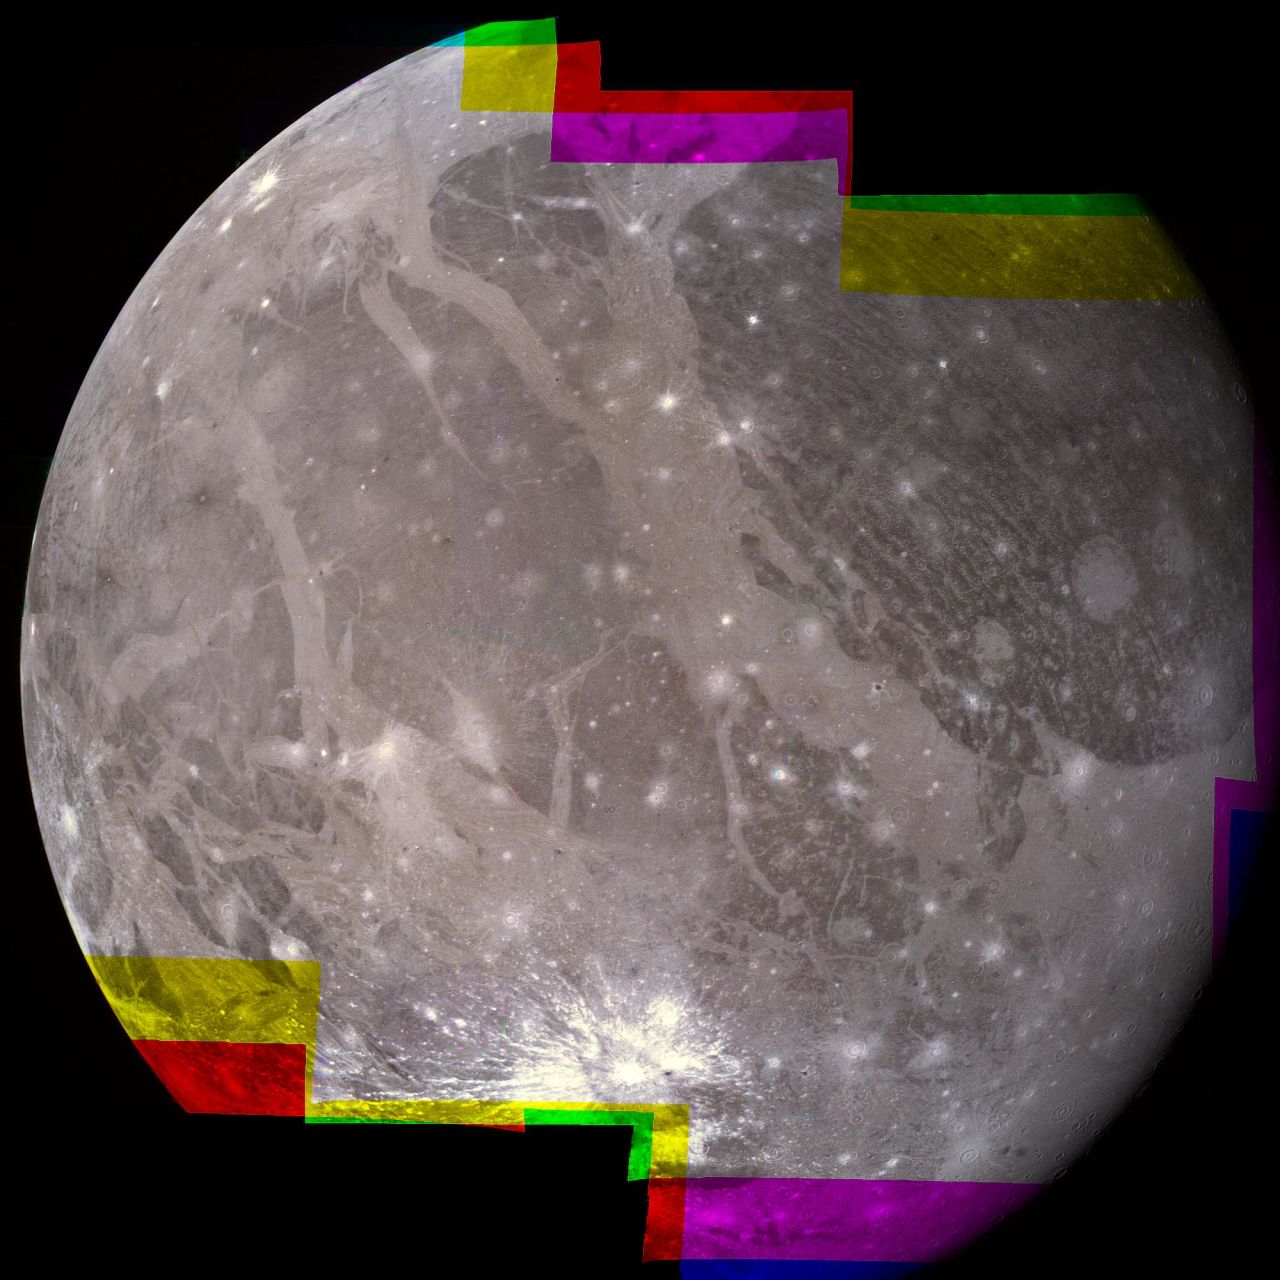 The hemisphere of Ganymede that faces away from the Sun displays a great variety of terrain in this mosaic from NASA's Voyager 2.